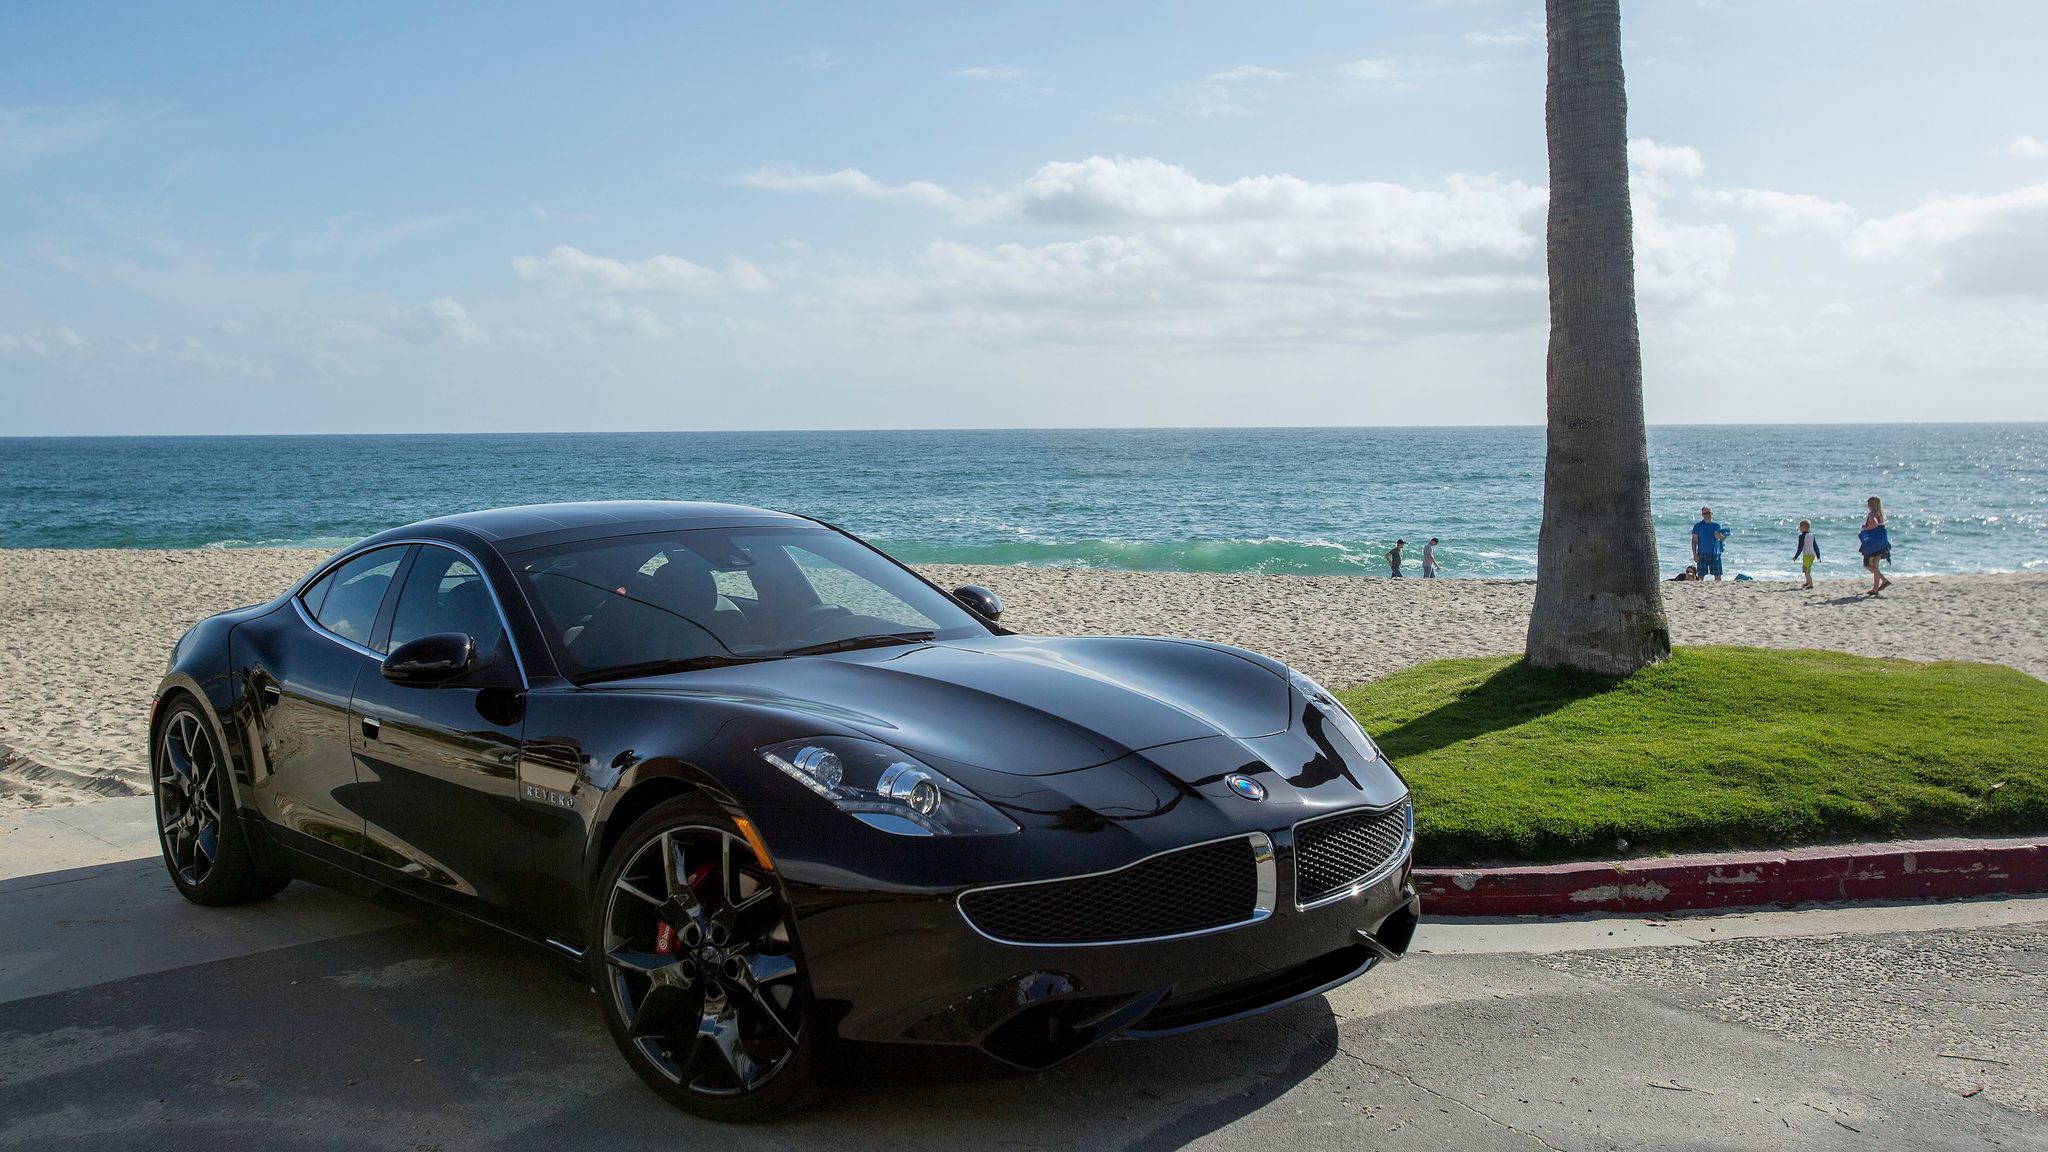 The sleek, low slung Revero features design language from the pen of Henrik Fisker, whose company of that name built the original Karma.